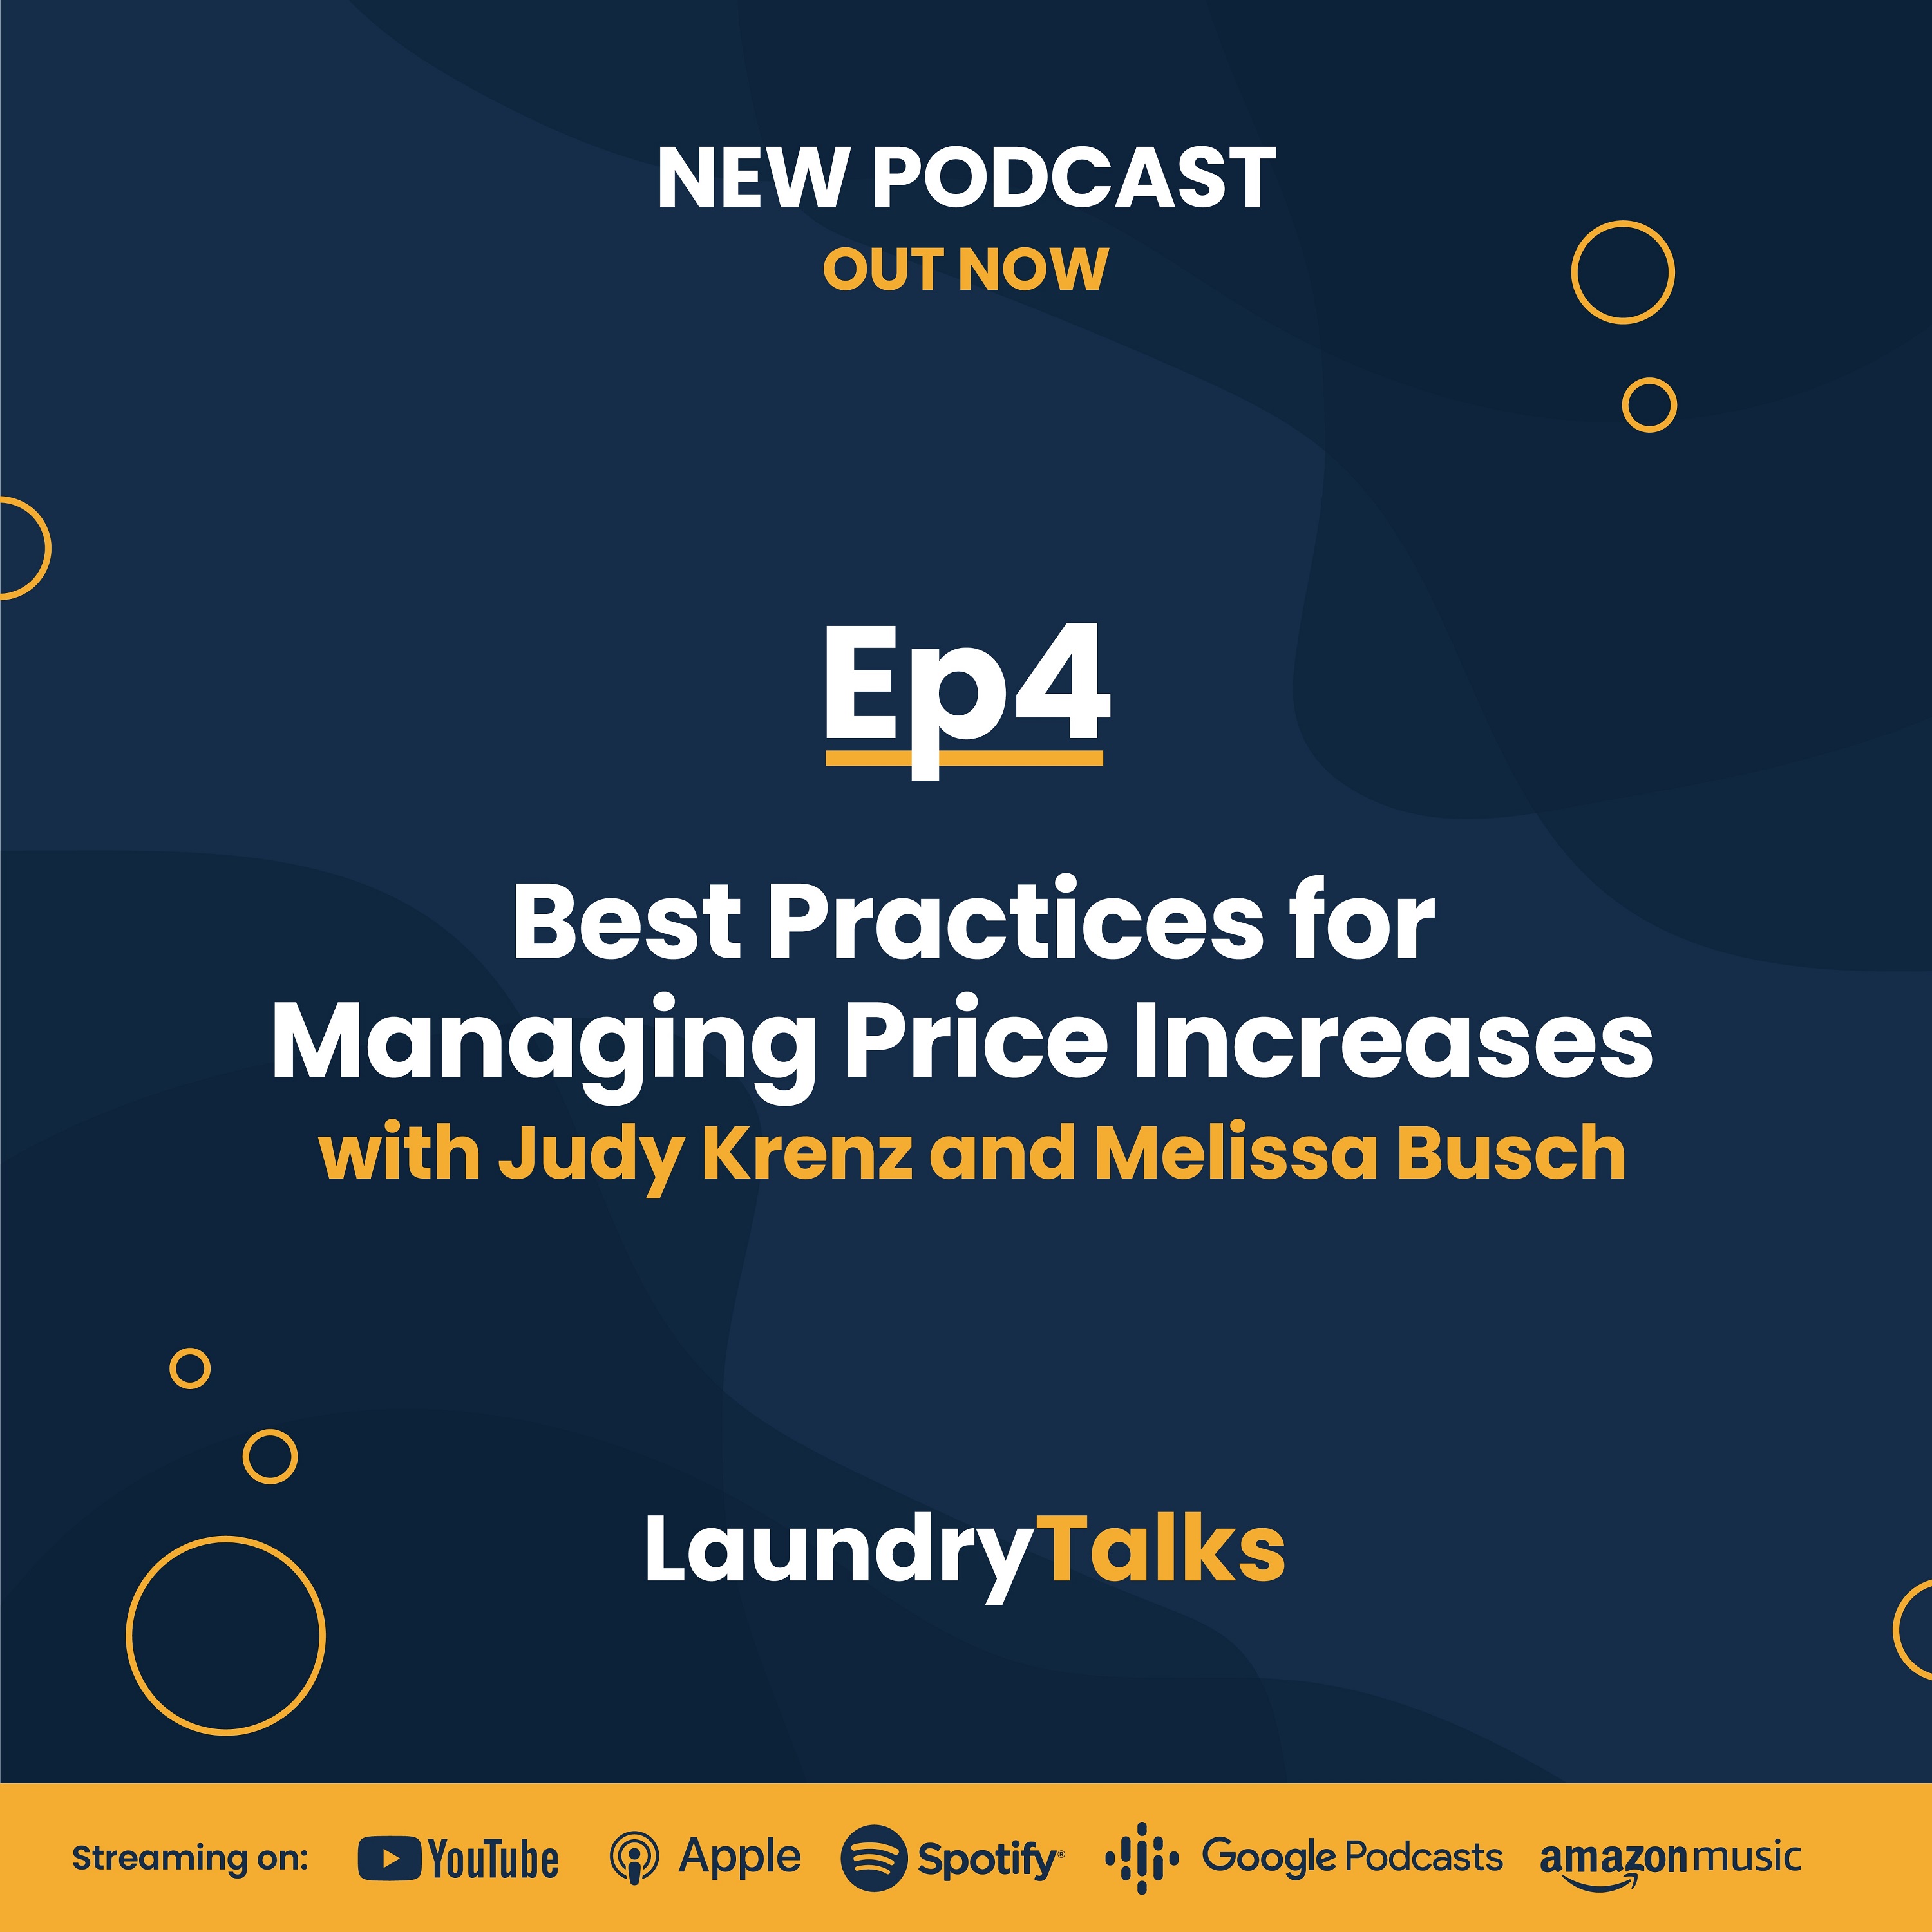 Best Practices for Managing Price Increases with Judy Krenz and Melissa Busch